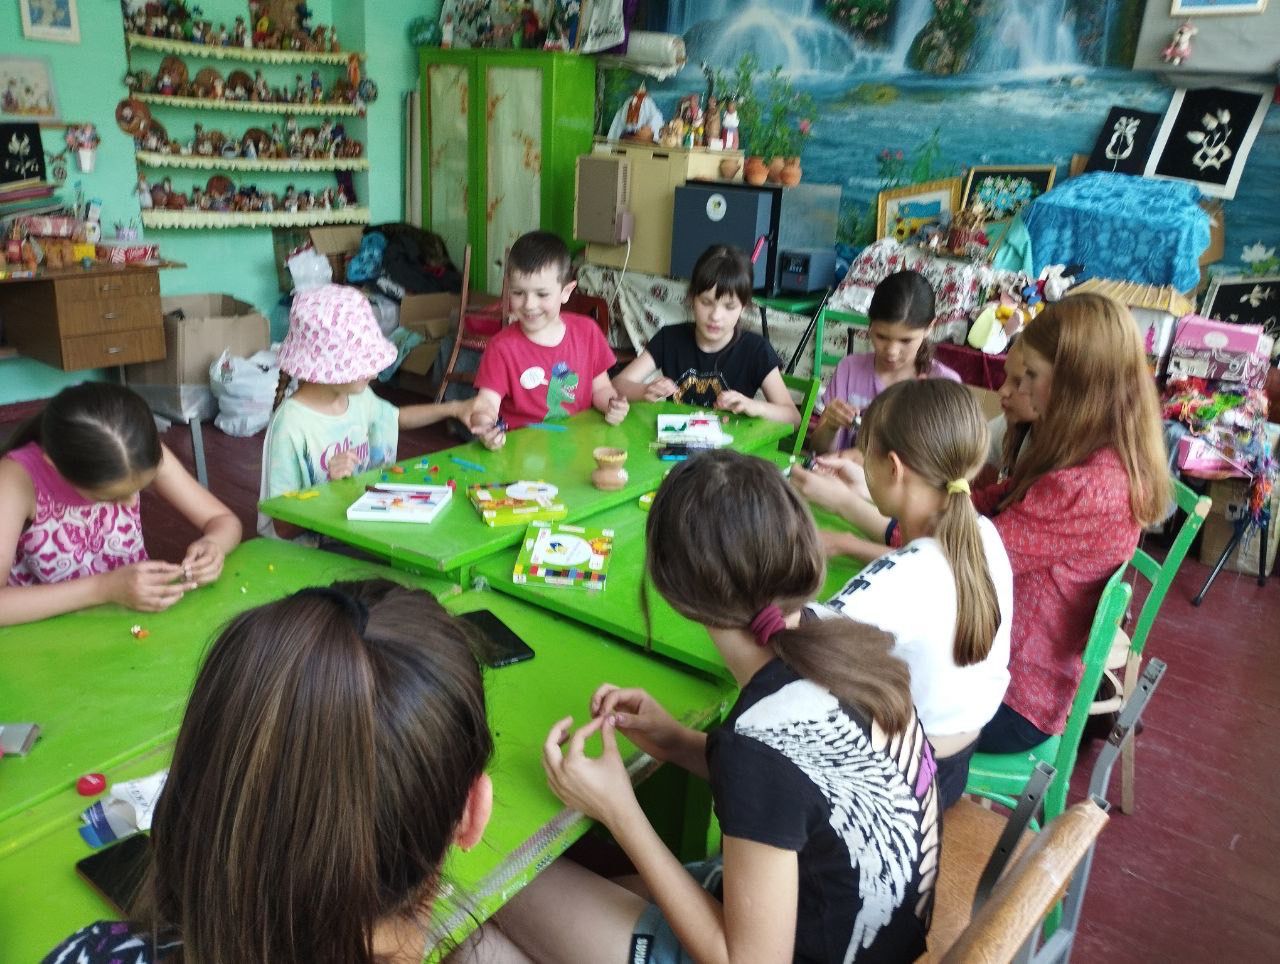 a group of children sitting around a green table.